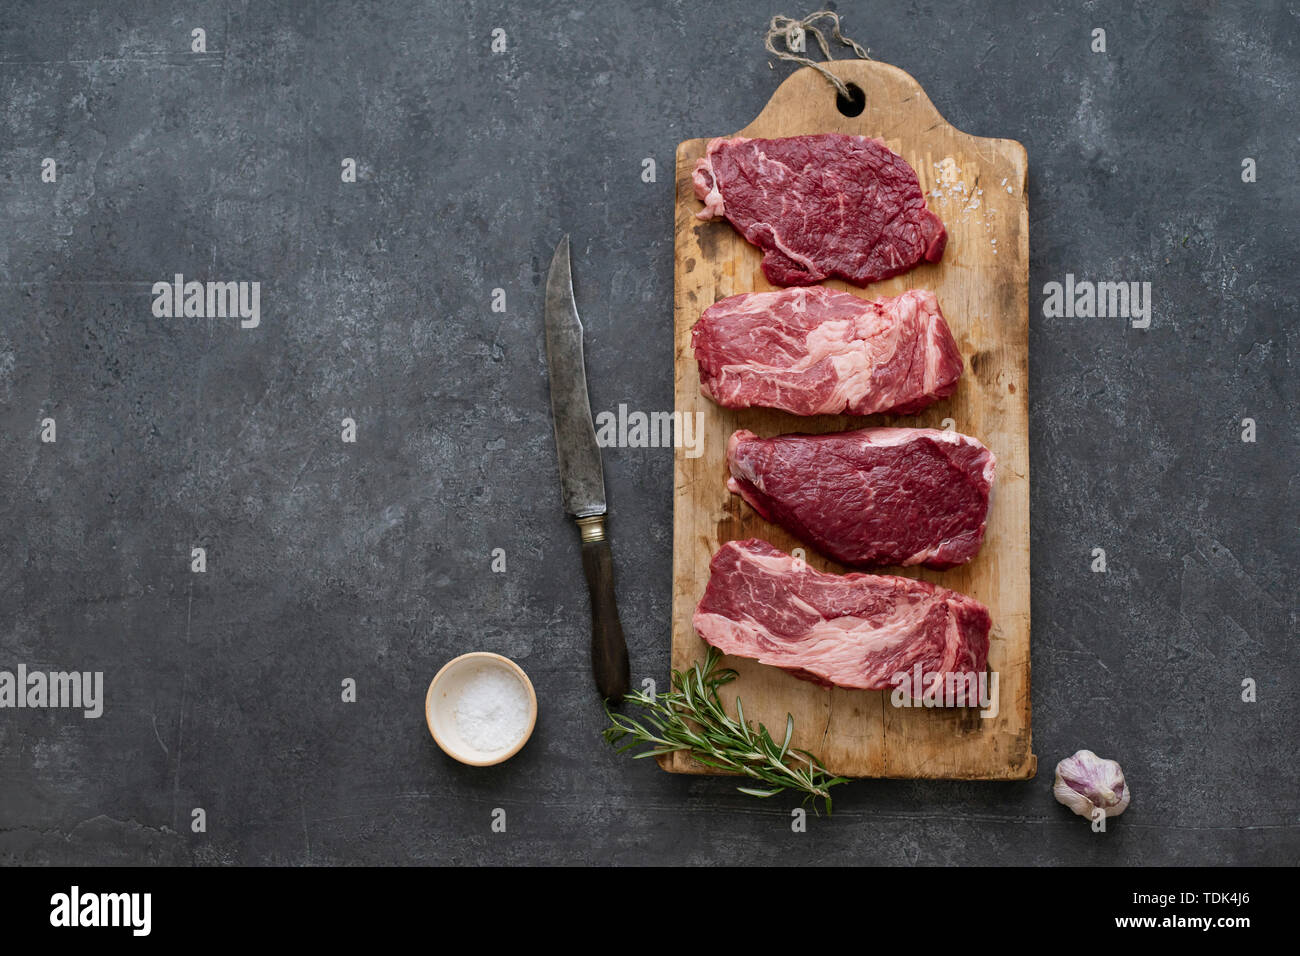 Raw black angus prime beef steak variety on vintage cutting board with rosemary, sea salt and spices Stock Photo